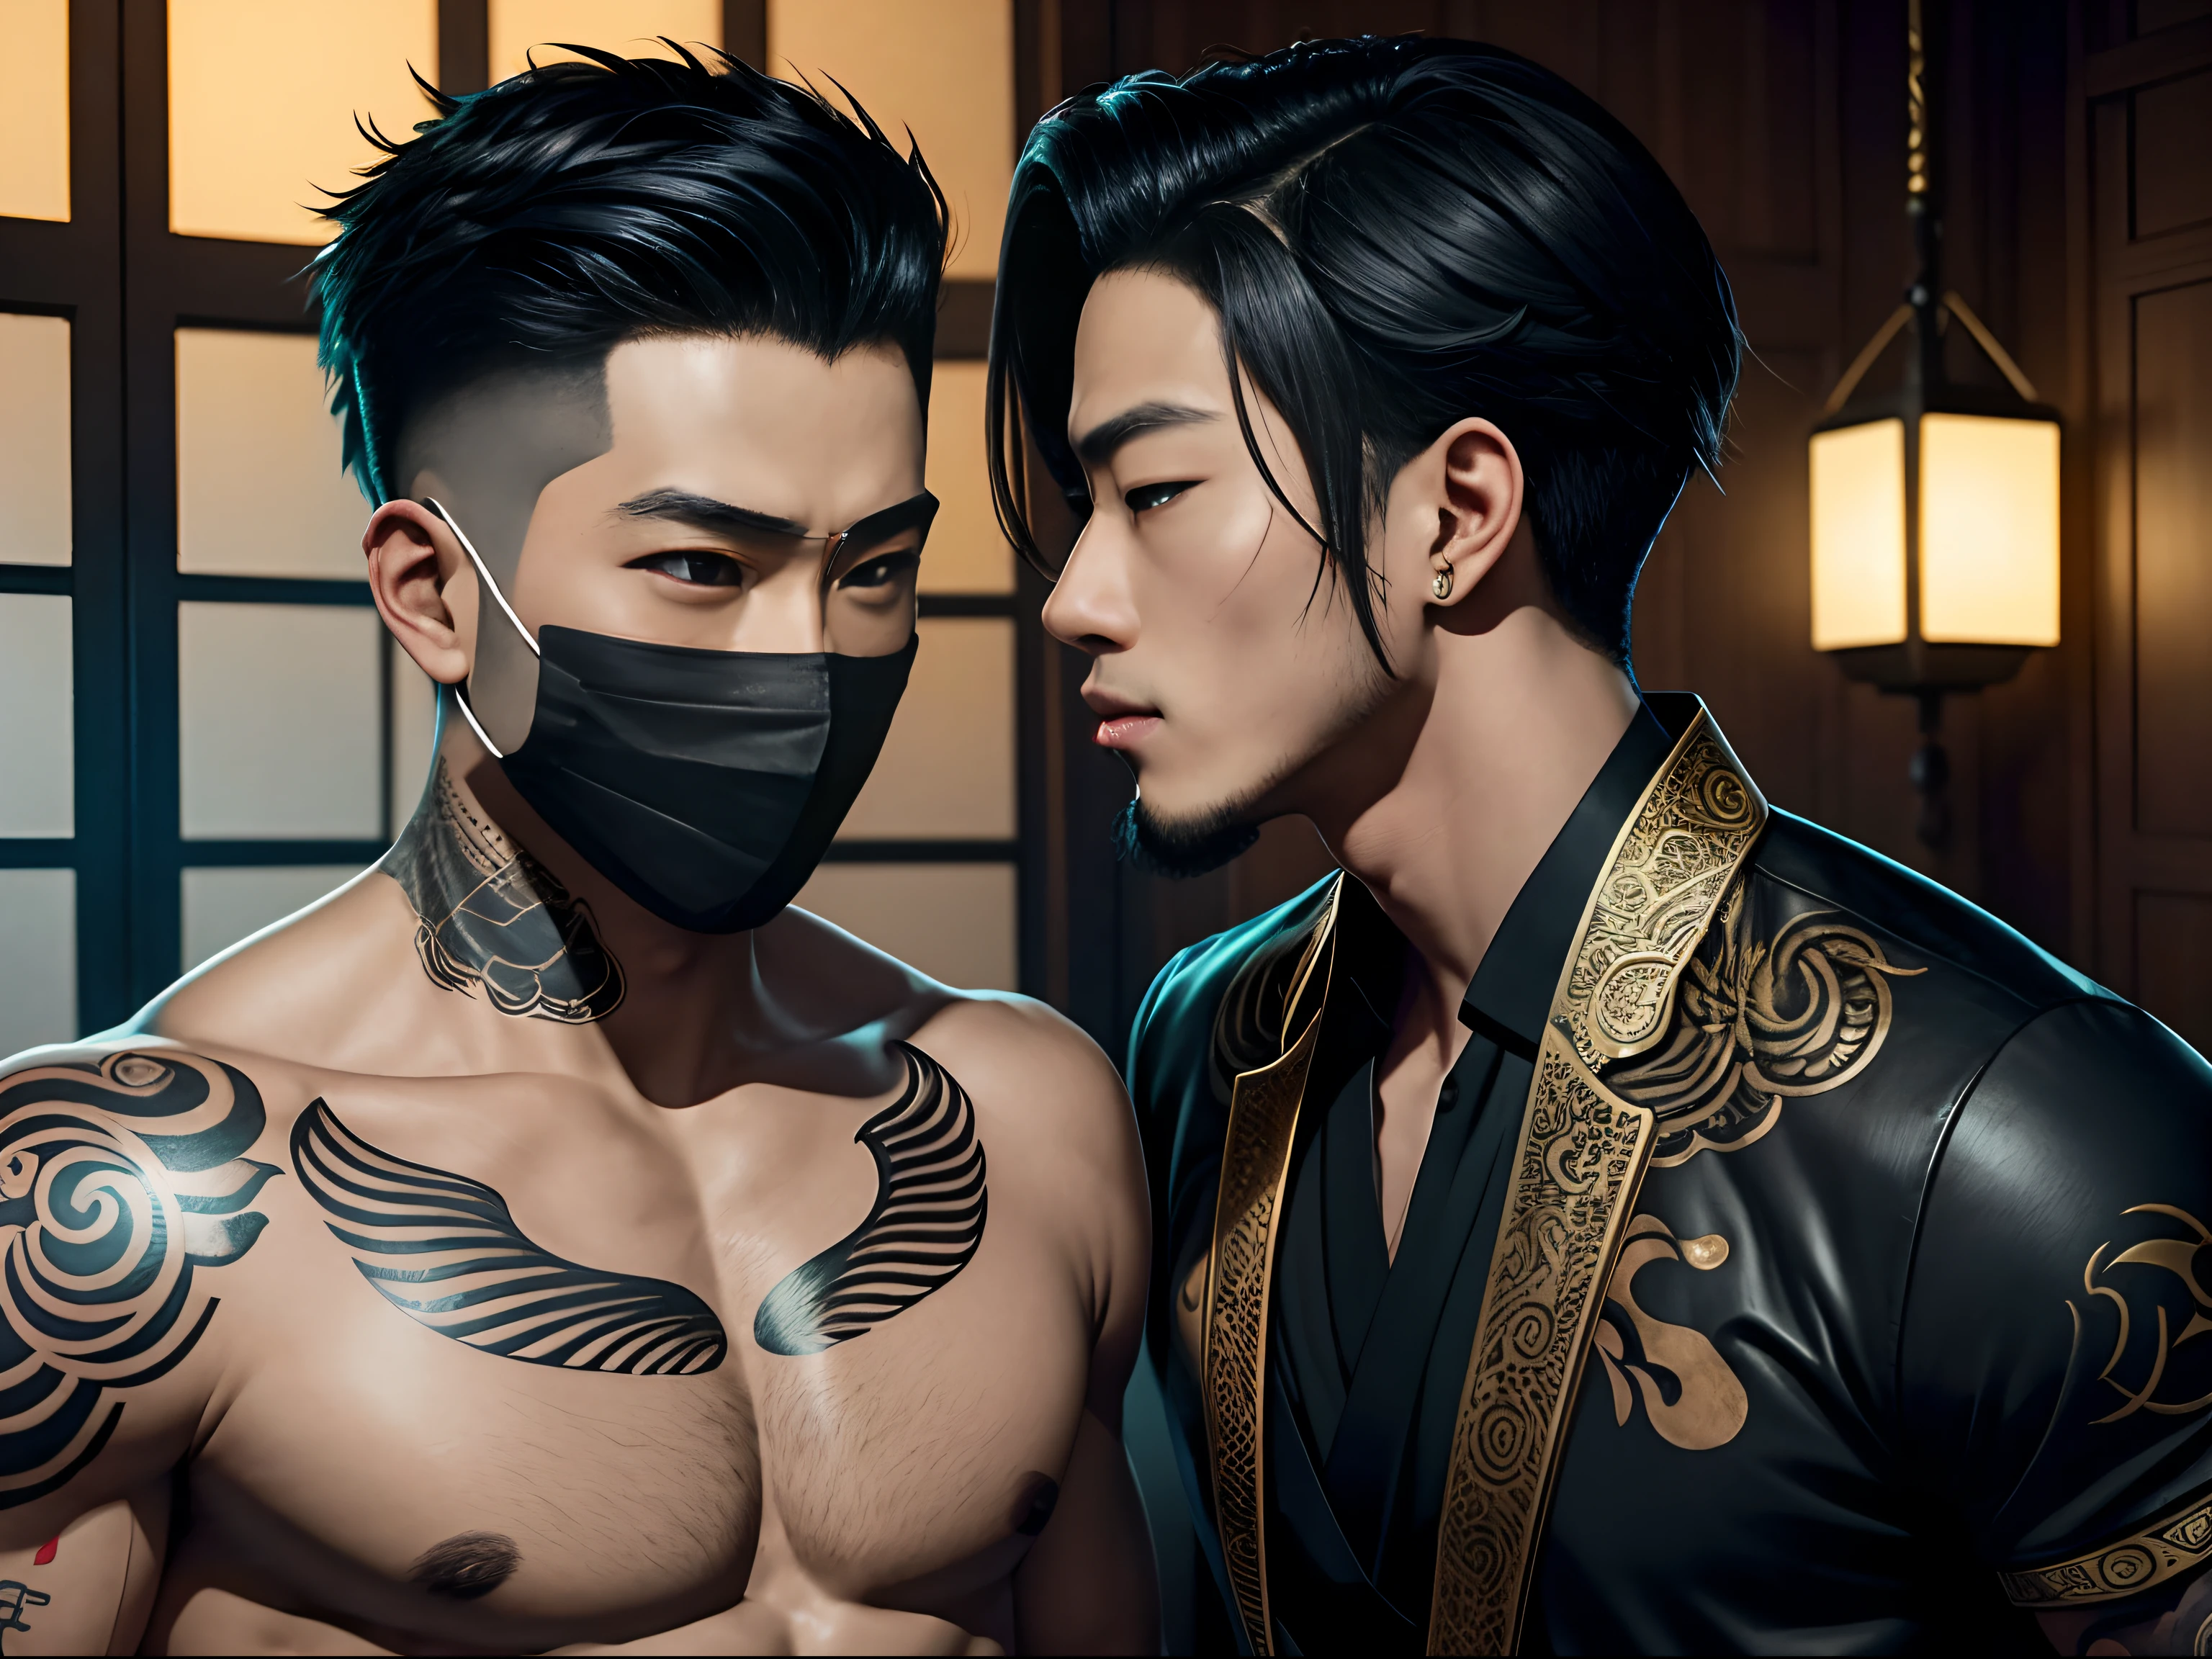 Two oriental men, Boyfriend,Gay, In lovemaking, roleplaying, Play as a sexy bandit（Coquettish）,A mask（black in color, Wear it on your face, Balaklafa）!!,Kim Sejia's anime eyes, Shin Jung-ho's anime eyeman,  Kiss!!,Head fit, It's almost a kiss, Oriental lanterns, body defined, Beautiful, Oriental, Realistic, Cinematic, High quality, 16k, Best quality, High details, Super detail, Tattoos, upper body photos, The pants are a little revealing